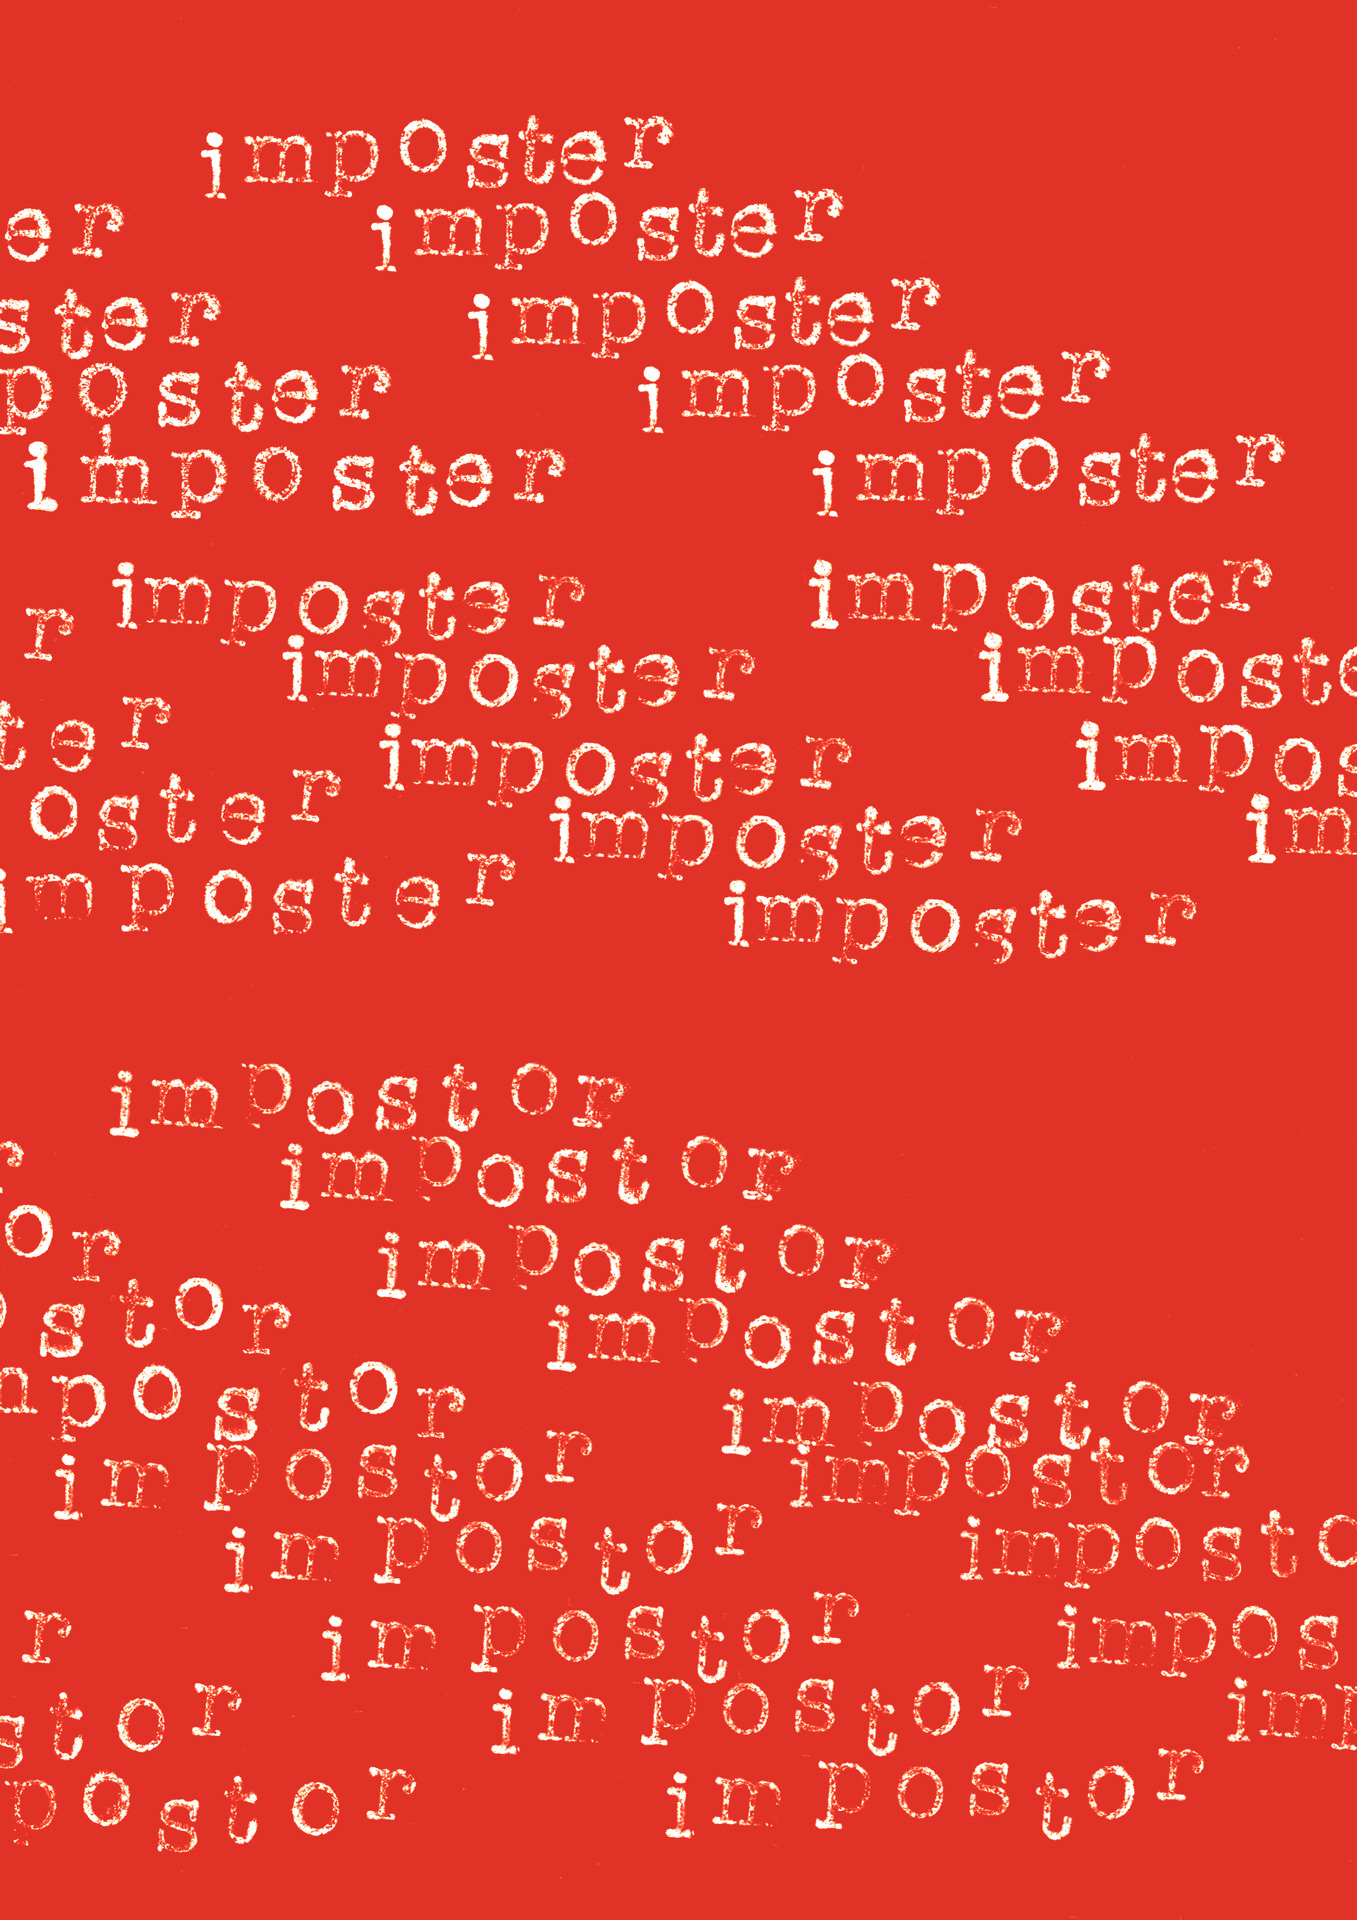 In the A4 graphic, there is distressed typewriter lettering featuring the words 'imposter' and 'impostor' spelt in both UK and US ways. The text is in white and appears against a bold red background.